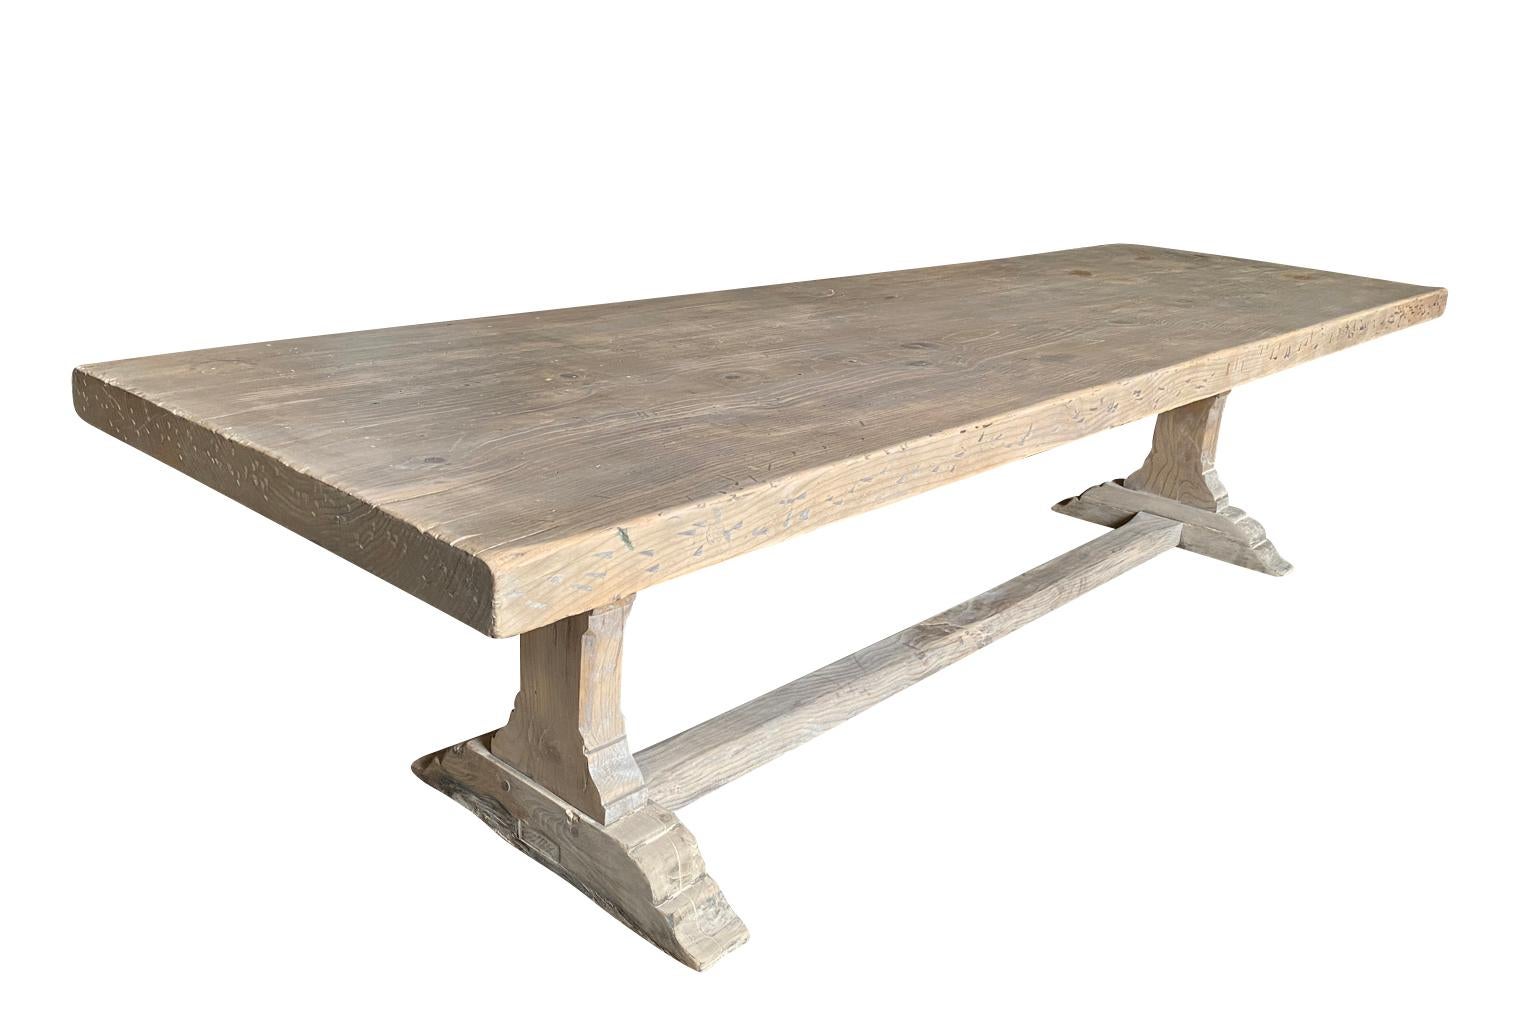 A very handsome early 20th century Farm House - Trestle Table from the Provence region of France.  Soundly constructed from beautiful chestnut and beech with a lovely trestle base and a solid board top.  Wonderful for large gatherings.